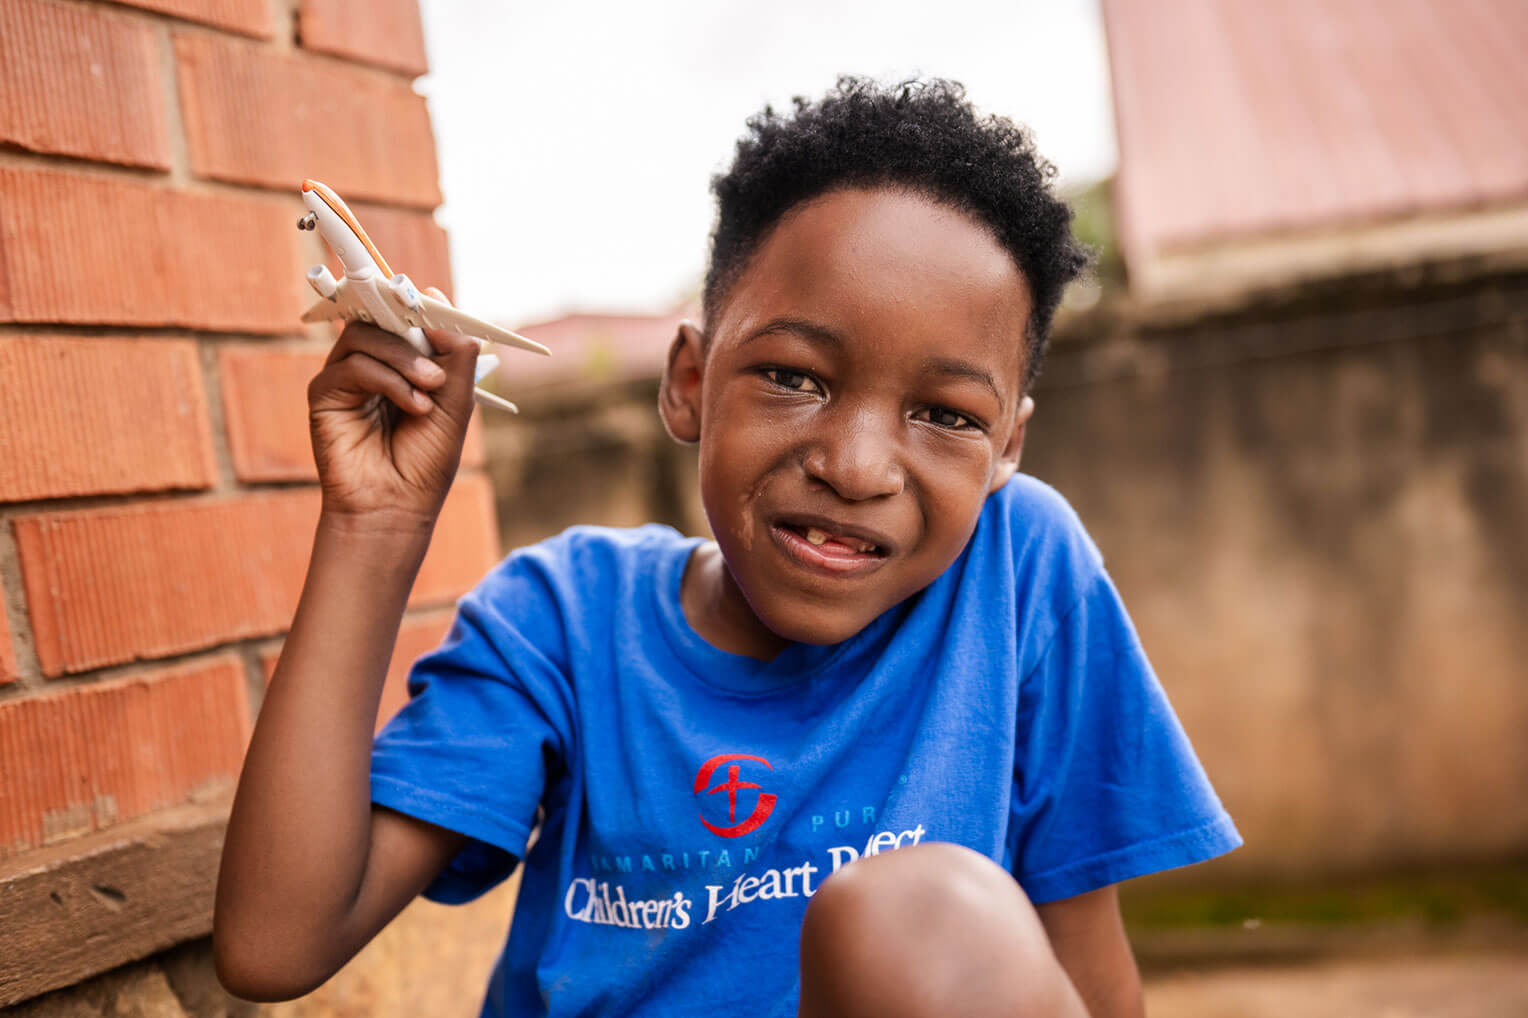 Like many little boys around the world, Franics loves Spiderman, airplanes, and making people laugh. Through the Samaritan's Purse Children's Heart Project, his life was saved and he has a bright future ahead of him.